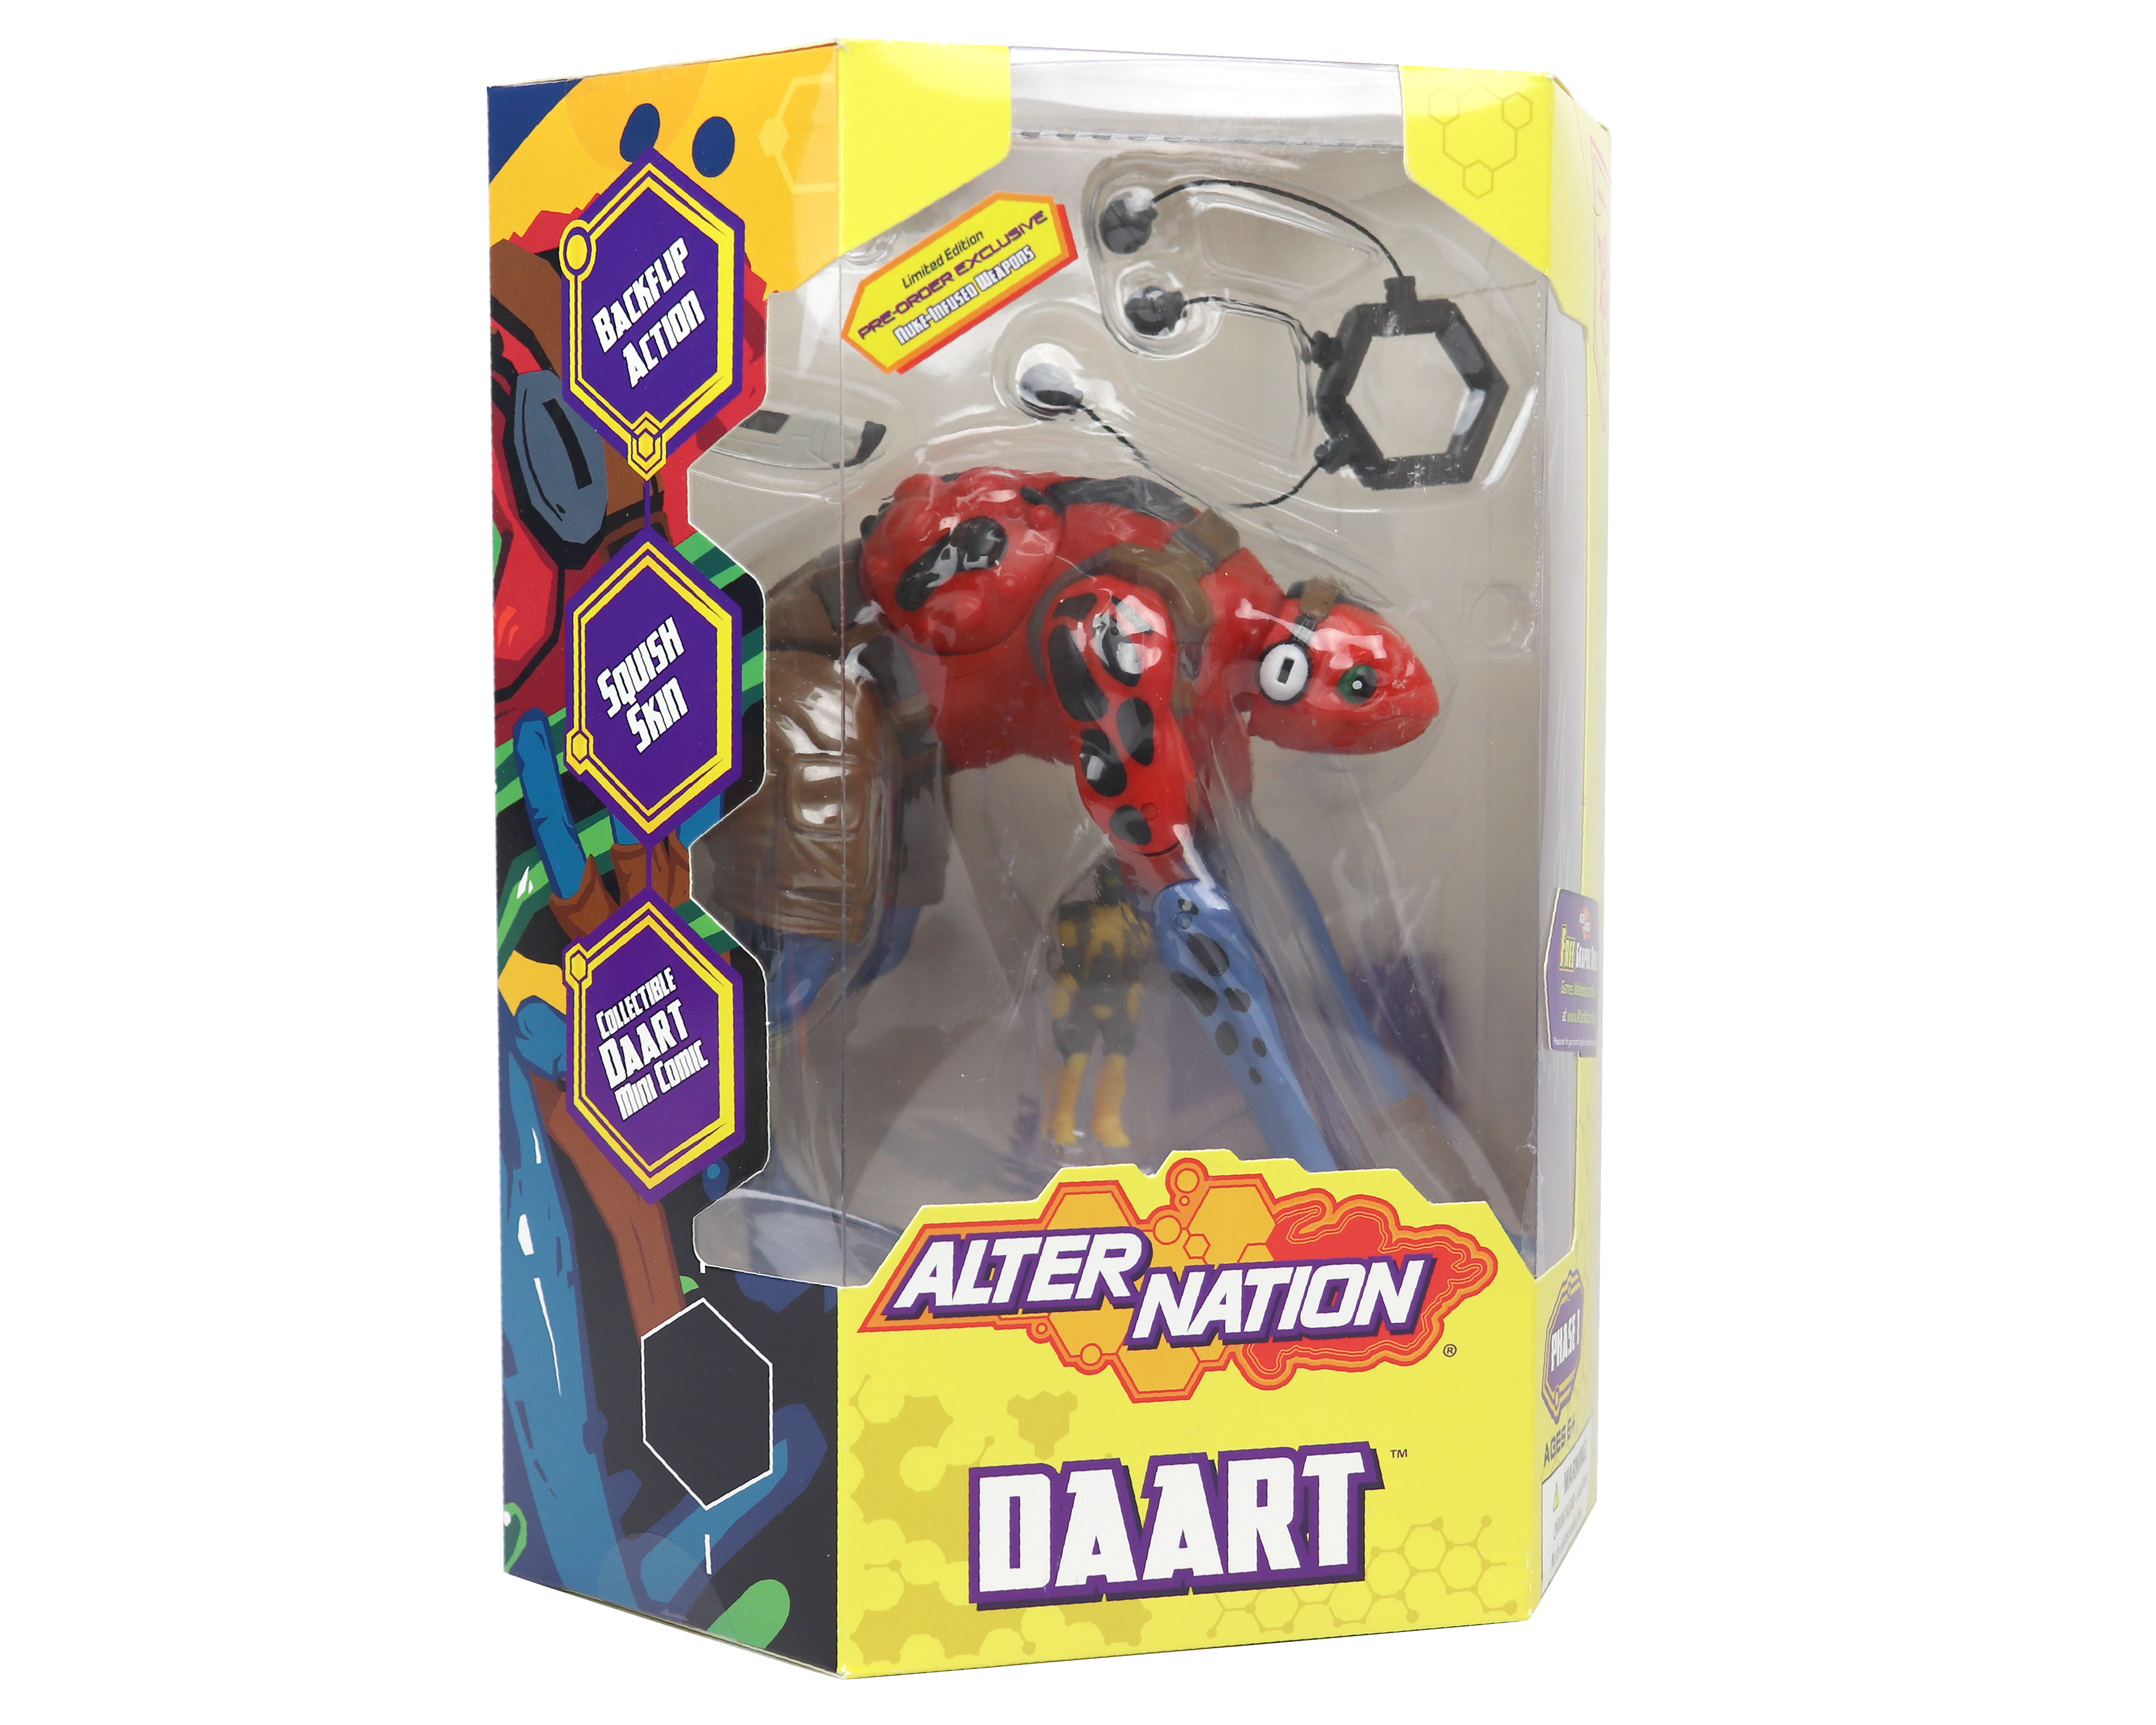 Alter Nation - Daart Action Figure - Limited Edition